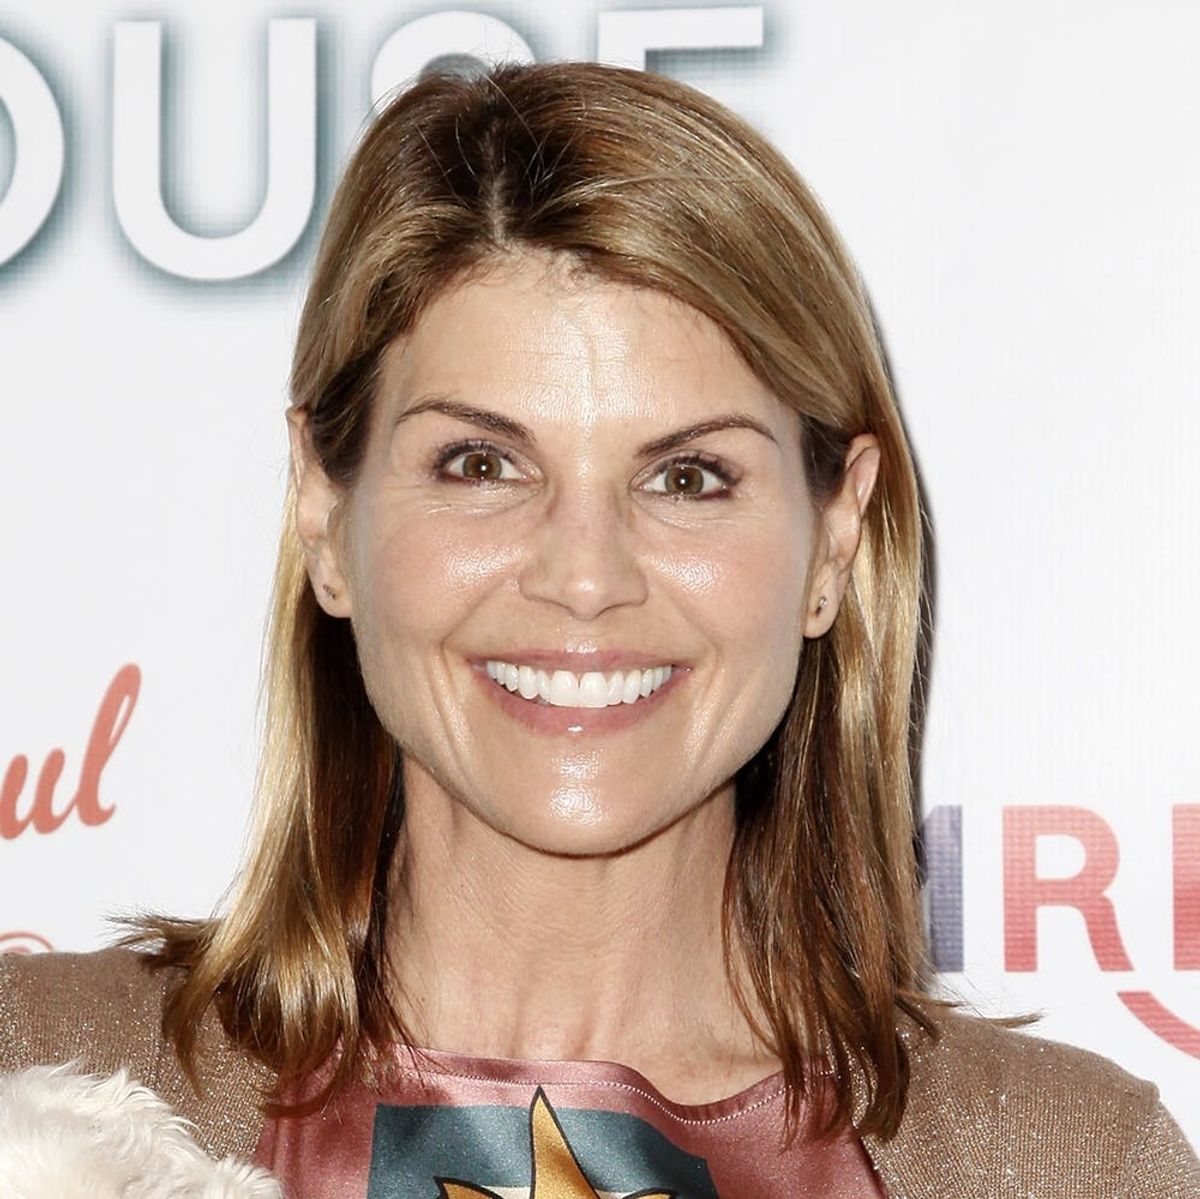 The Lori Loughlin and Felicity Huffman Fraud Scandal Is a Parable About Wealth Inequality in America